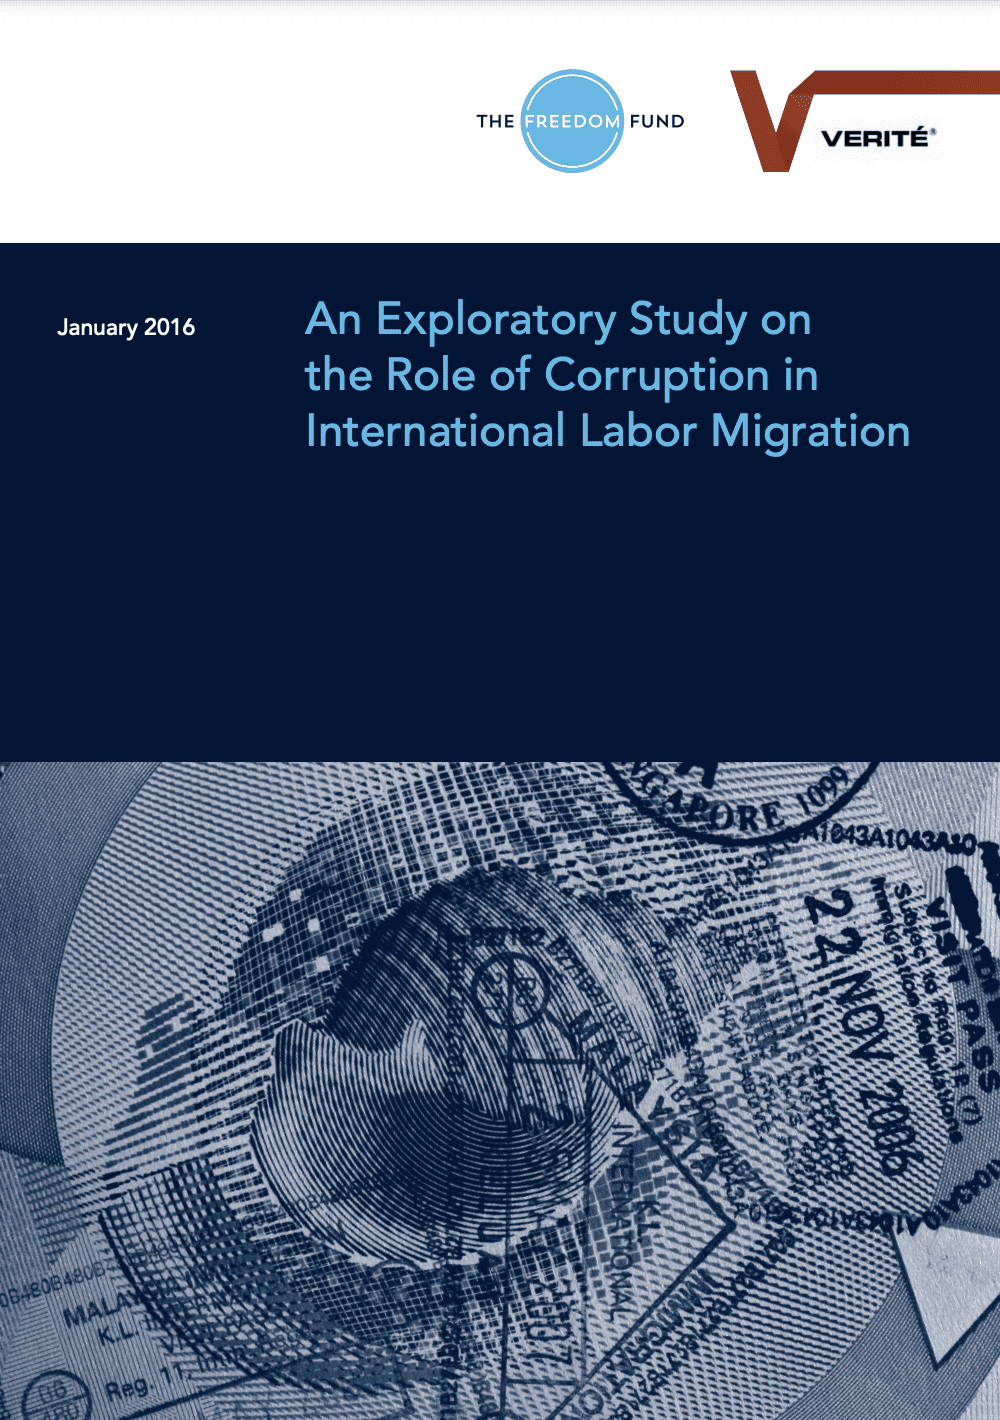 An Exploratory Study on the Role of Corruption in International Labor Migration